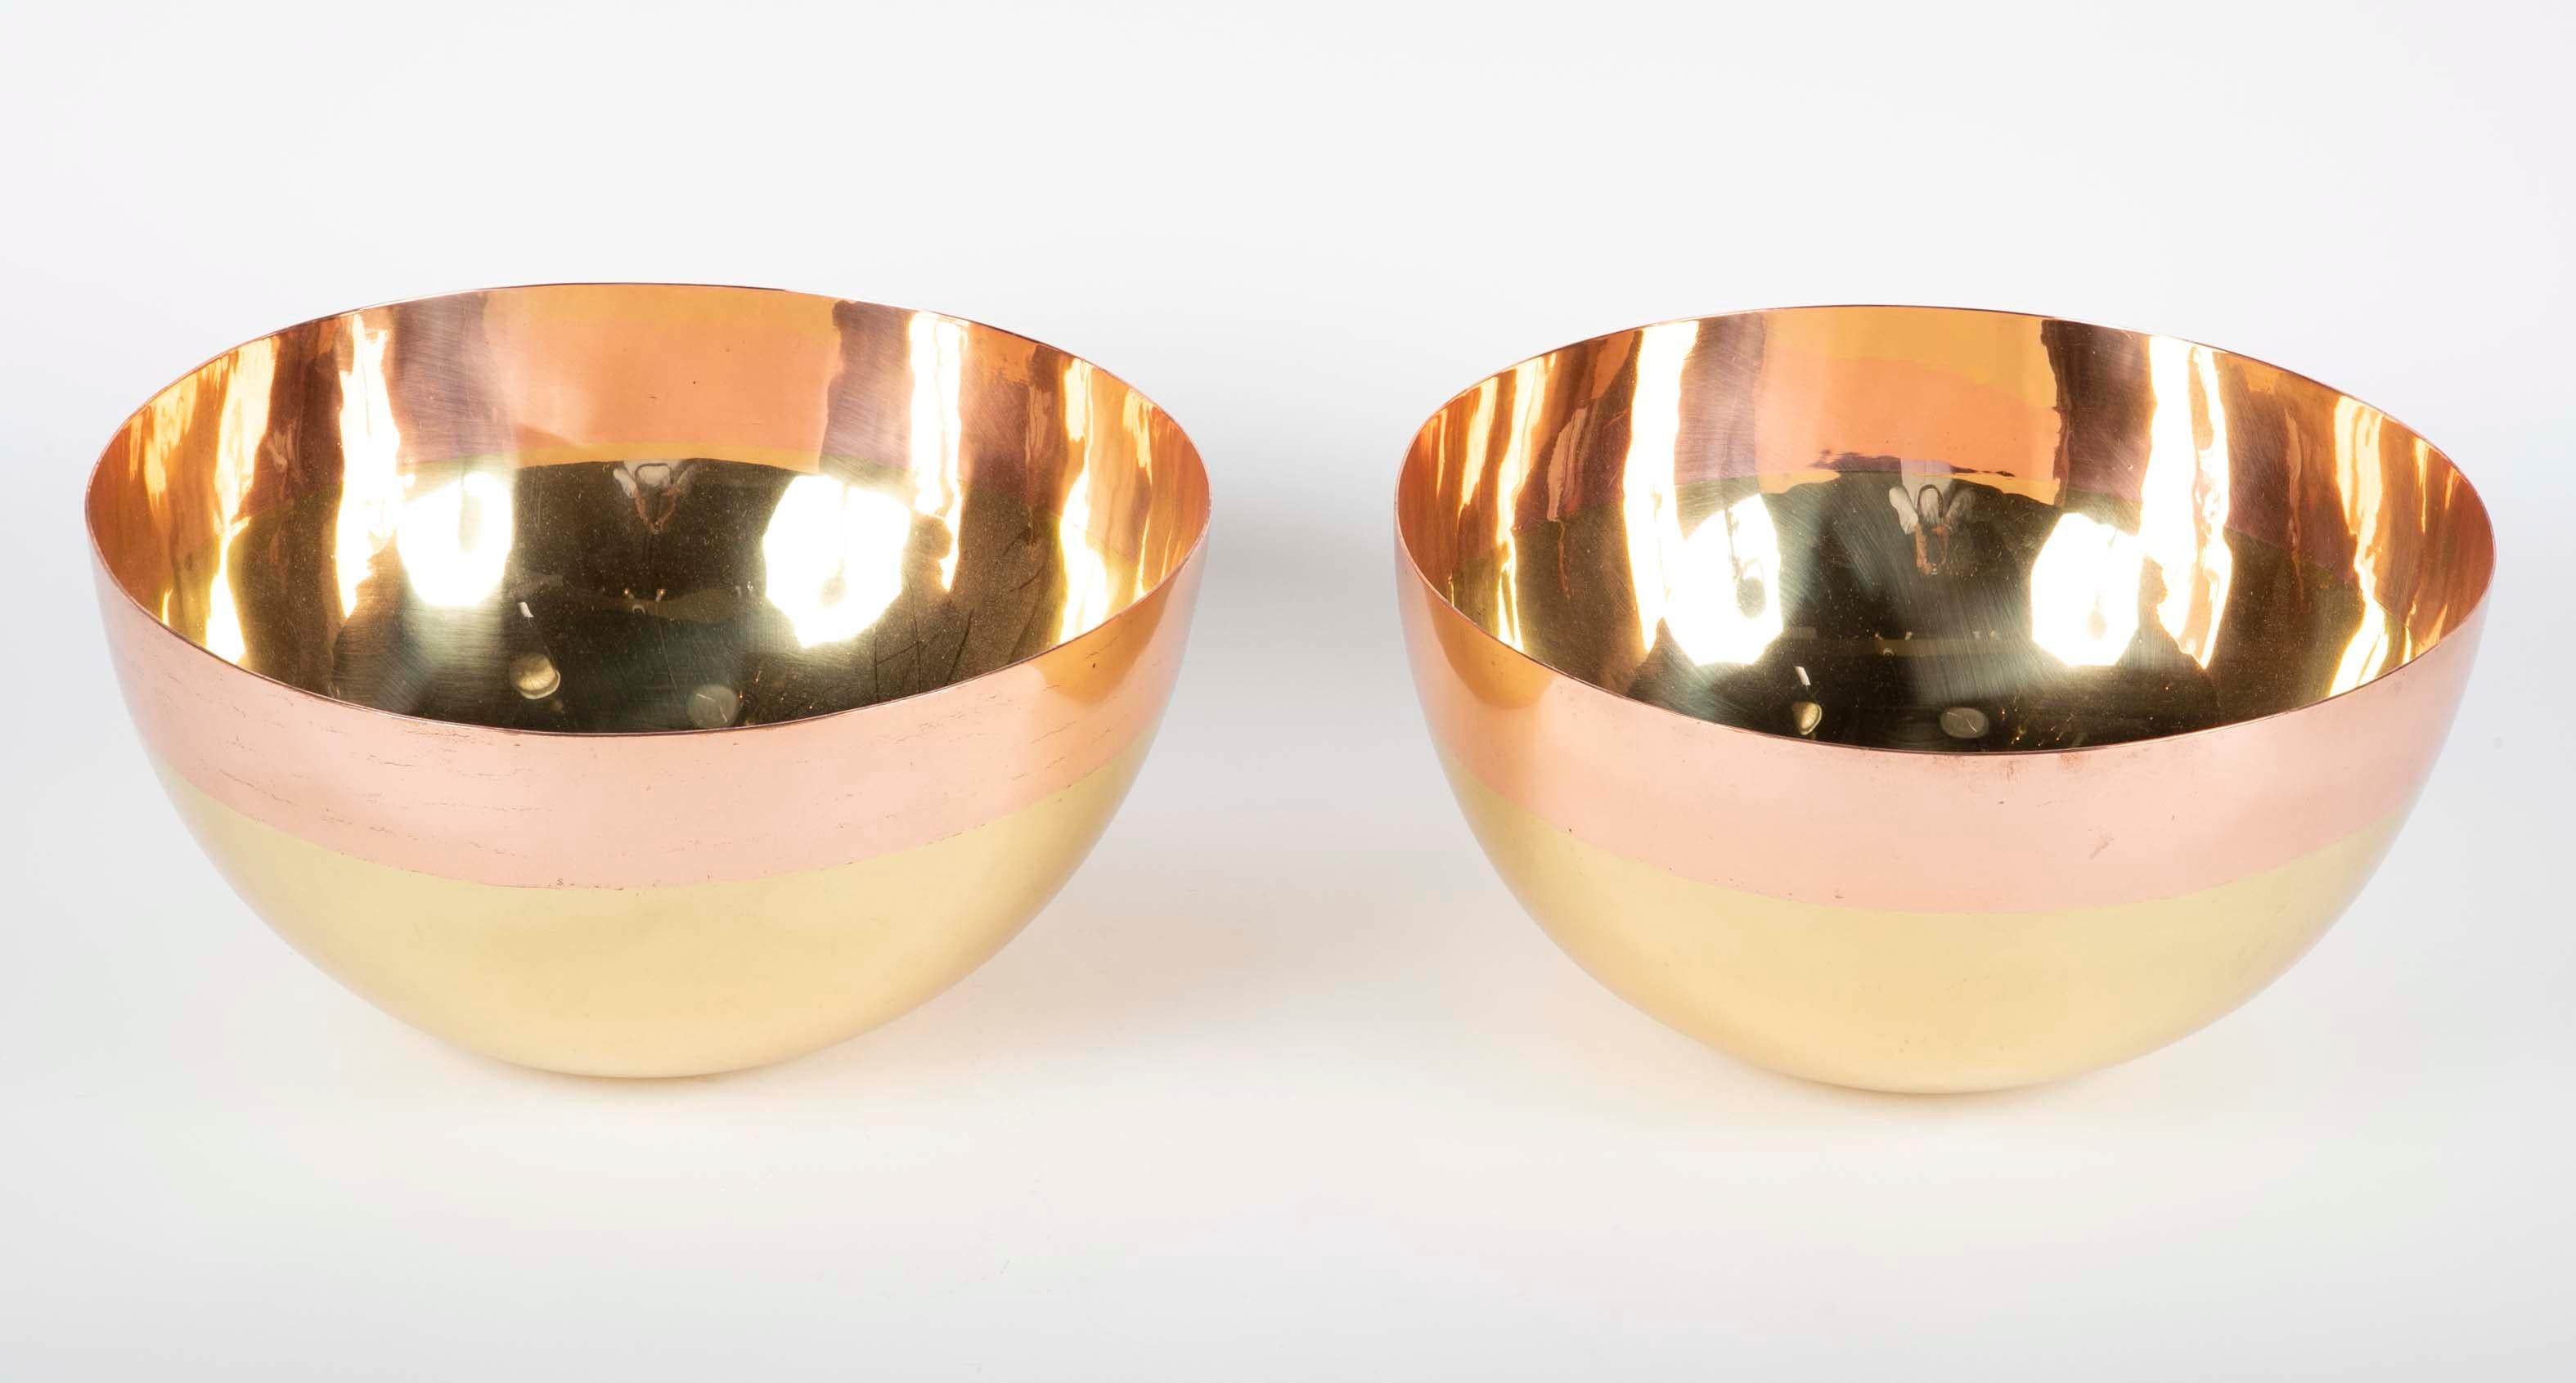 Pair of unusual brass & copper overlay bowls, circa 1920 - 1930.